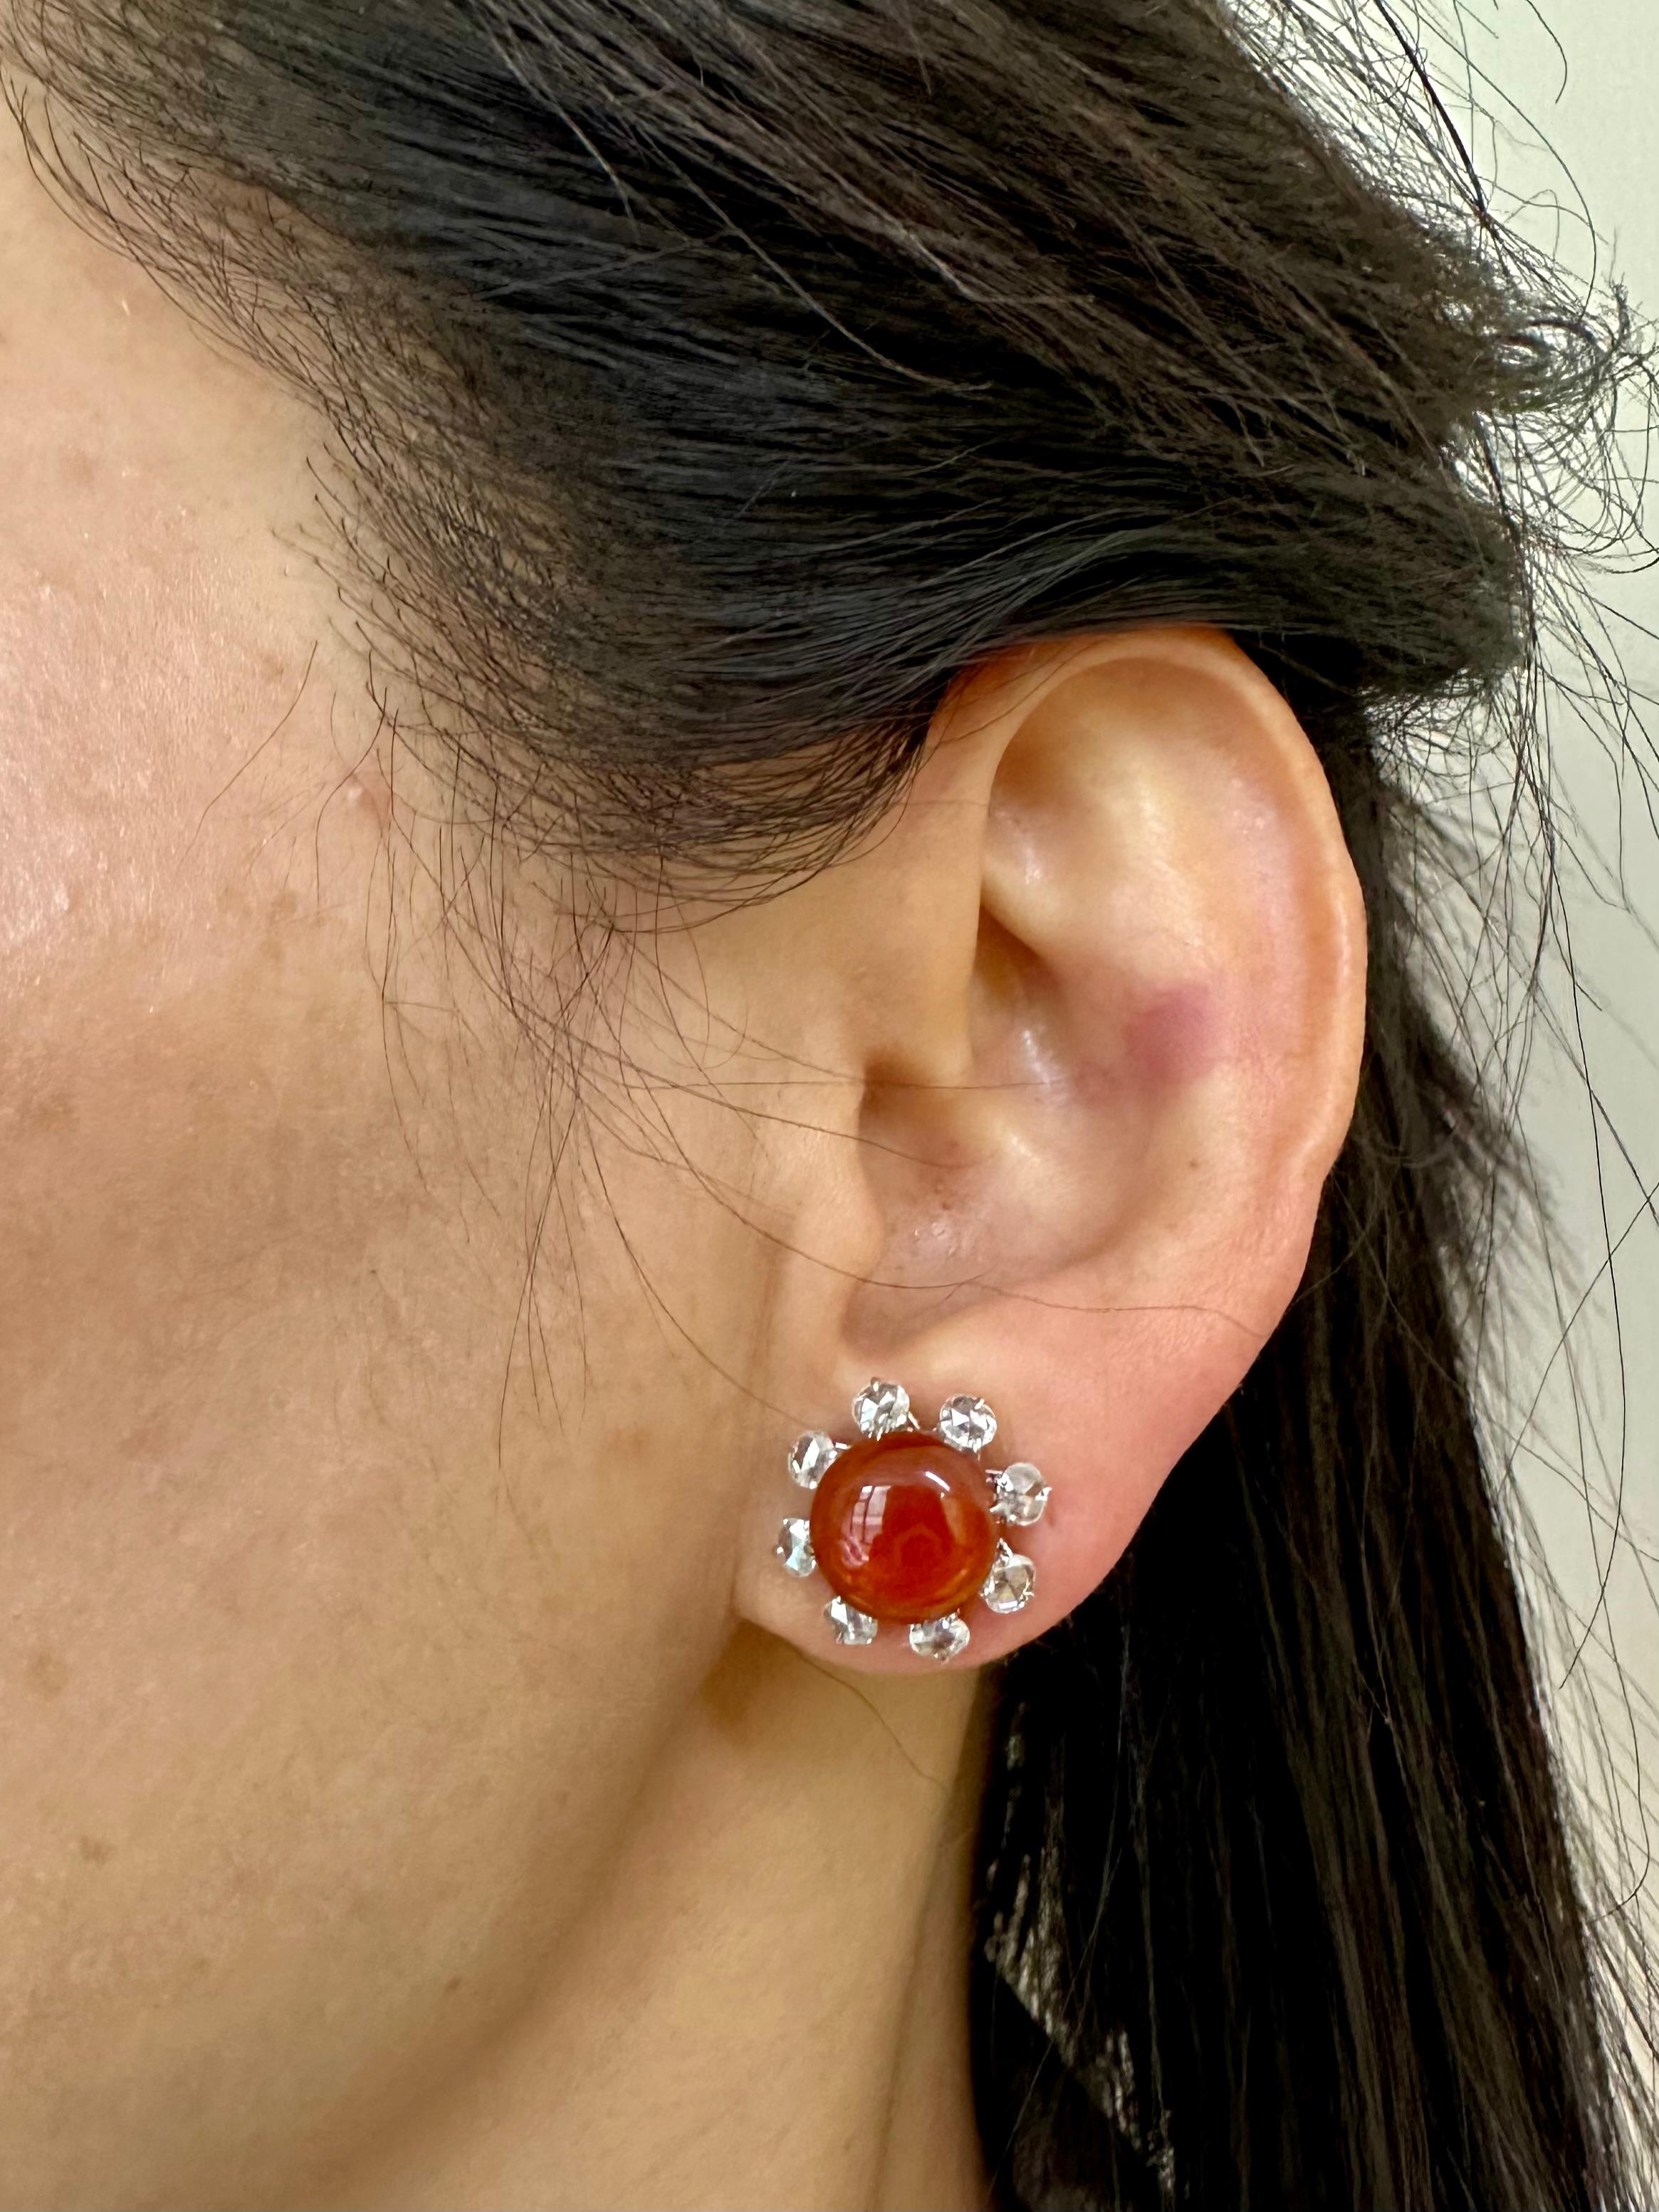 Please check out the HD video. This is a very special pair of earrings. Made with the best imperial RED (the actual color is a brownish- red but in the jade trade, they are referred to as red jade) jade cabochons. They GLOW! The jades in these